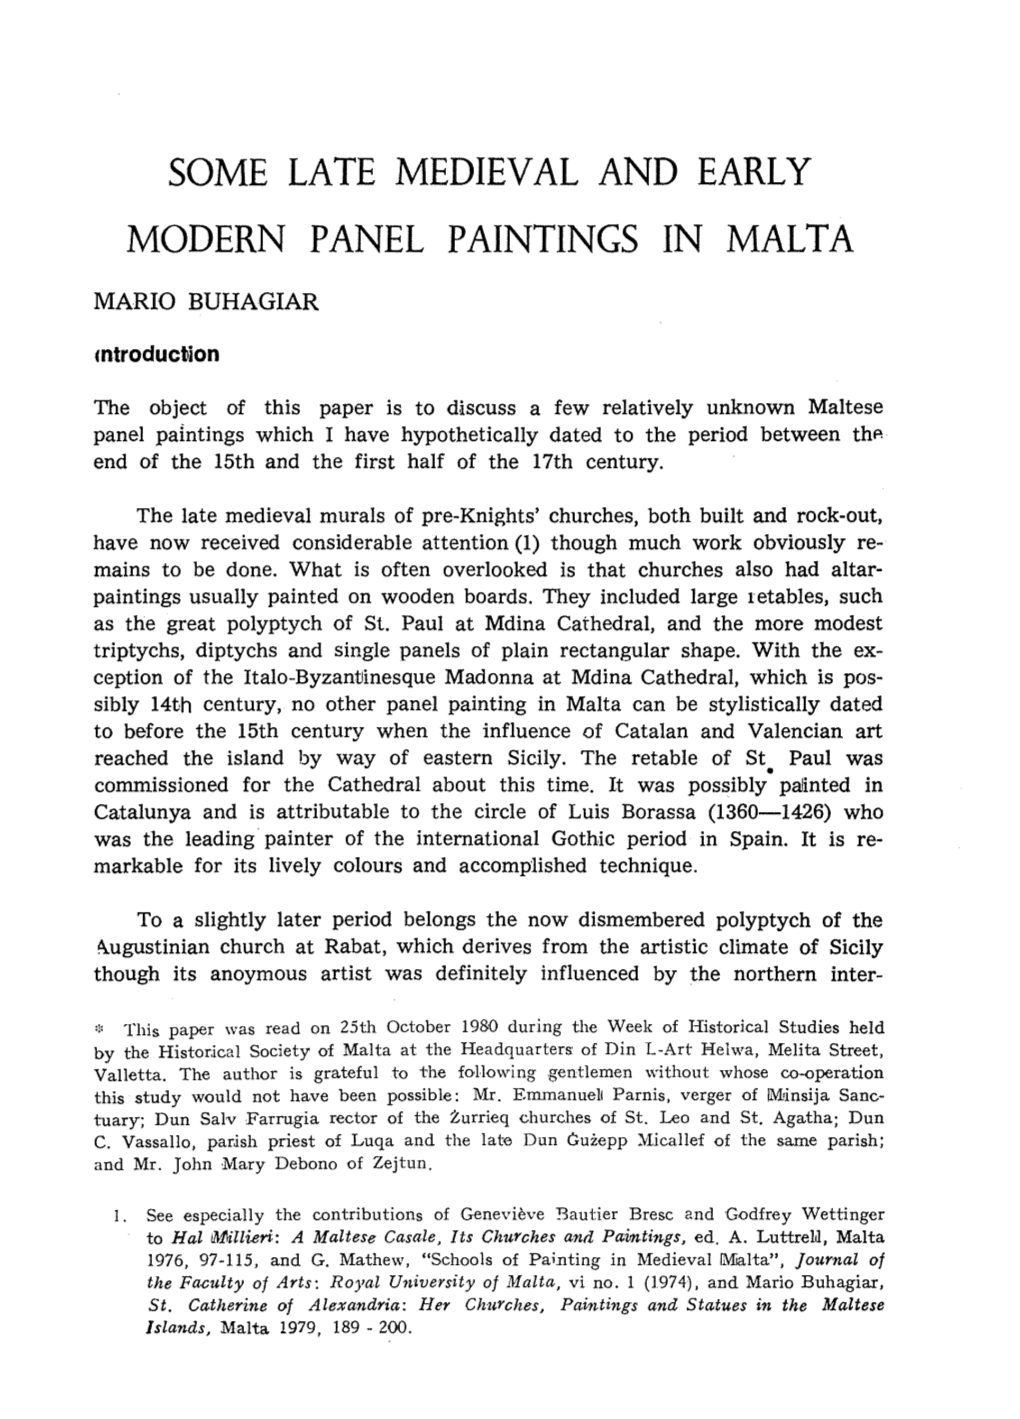 Some Late Medieval and Early Modern Panel Paintings in Malta